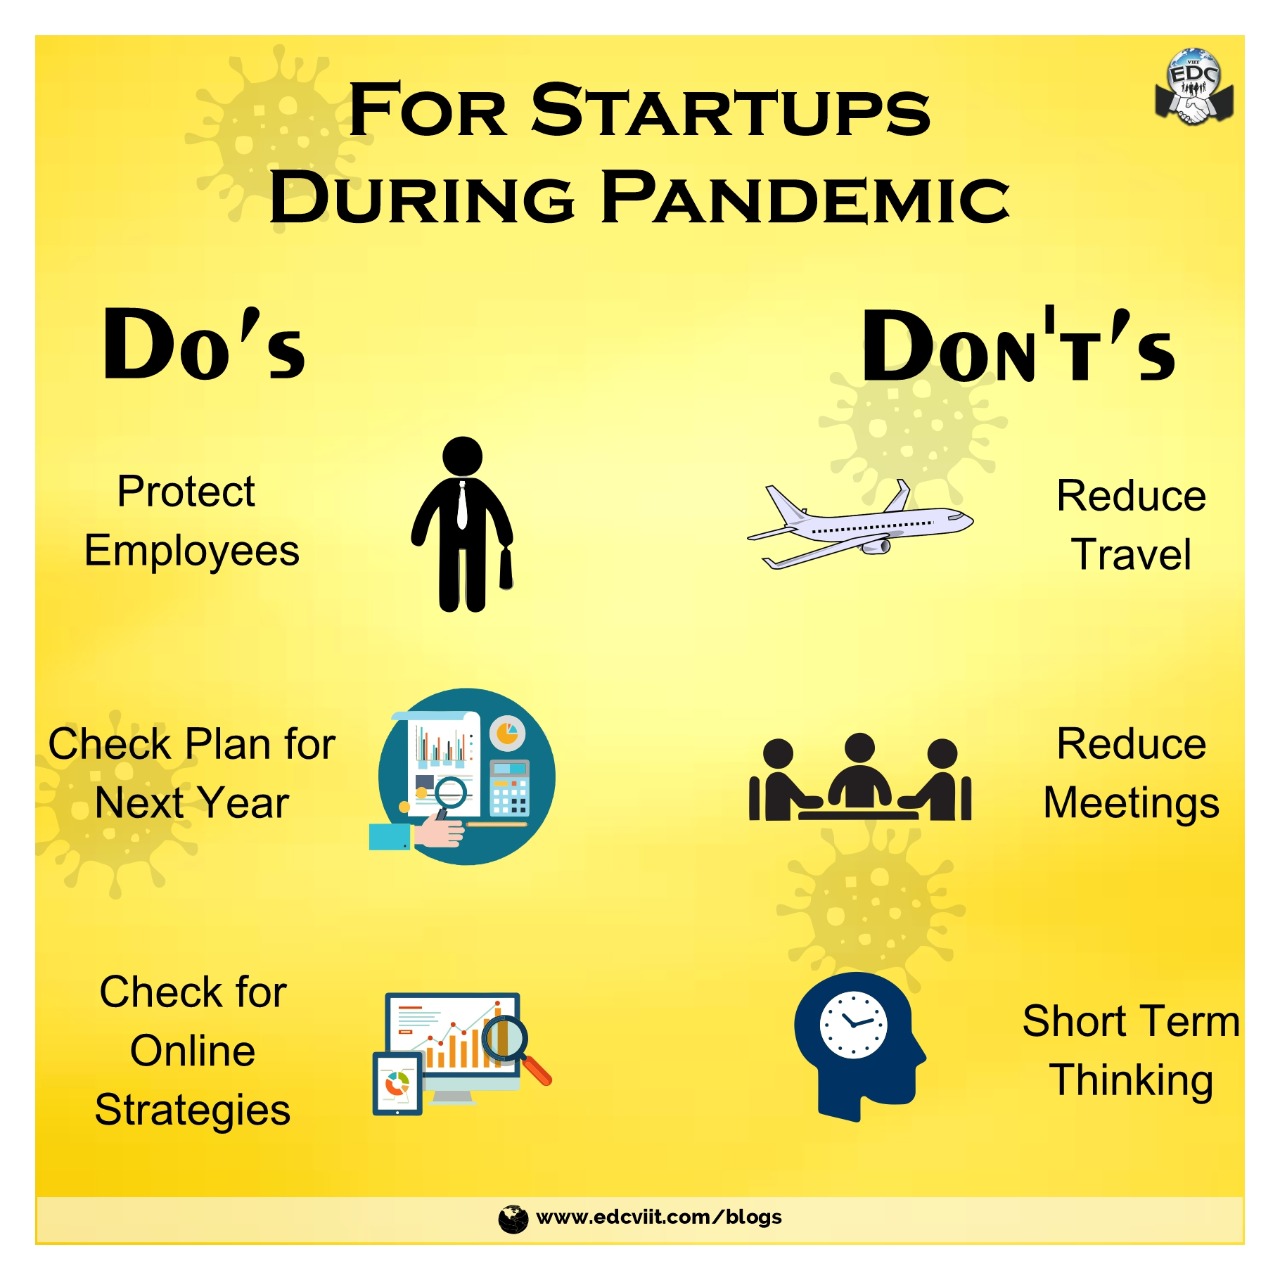 DO's AND DON'Ts FOR A STARTUP DURING THE PANDEMIC